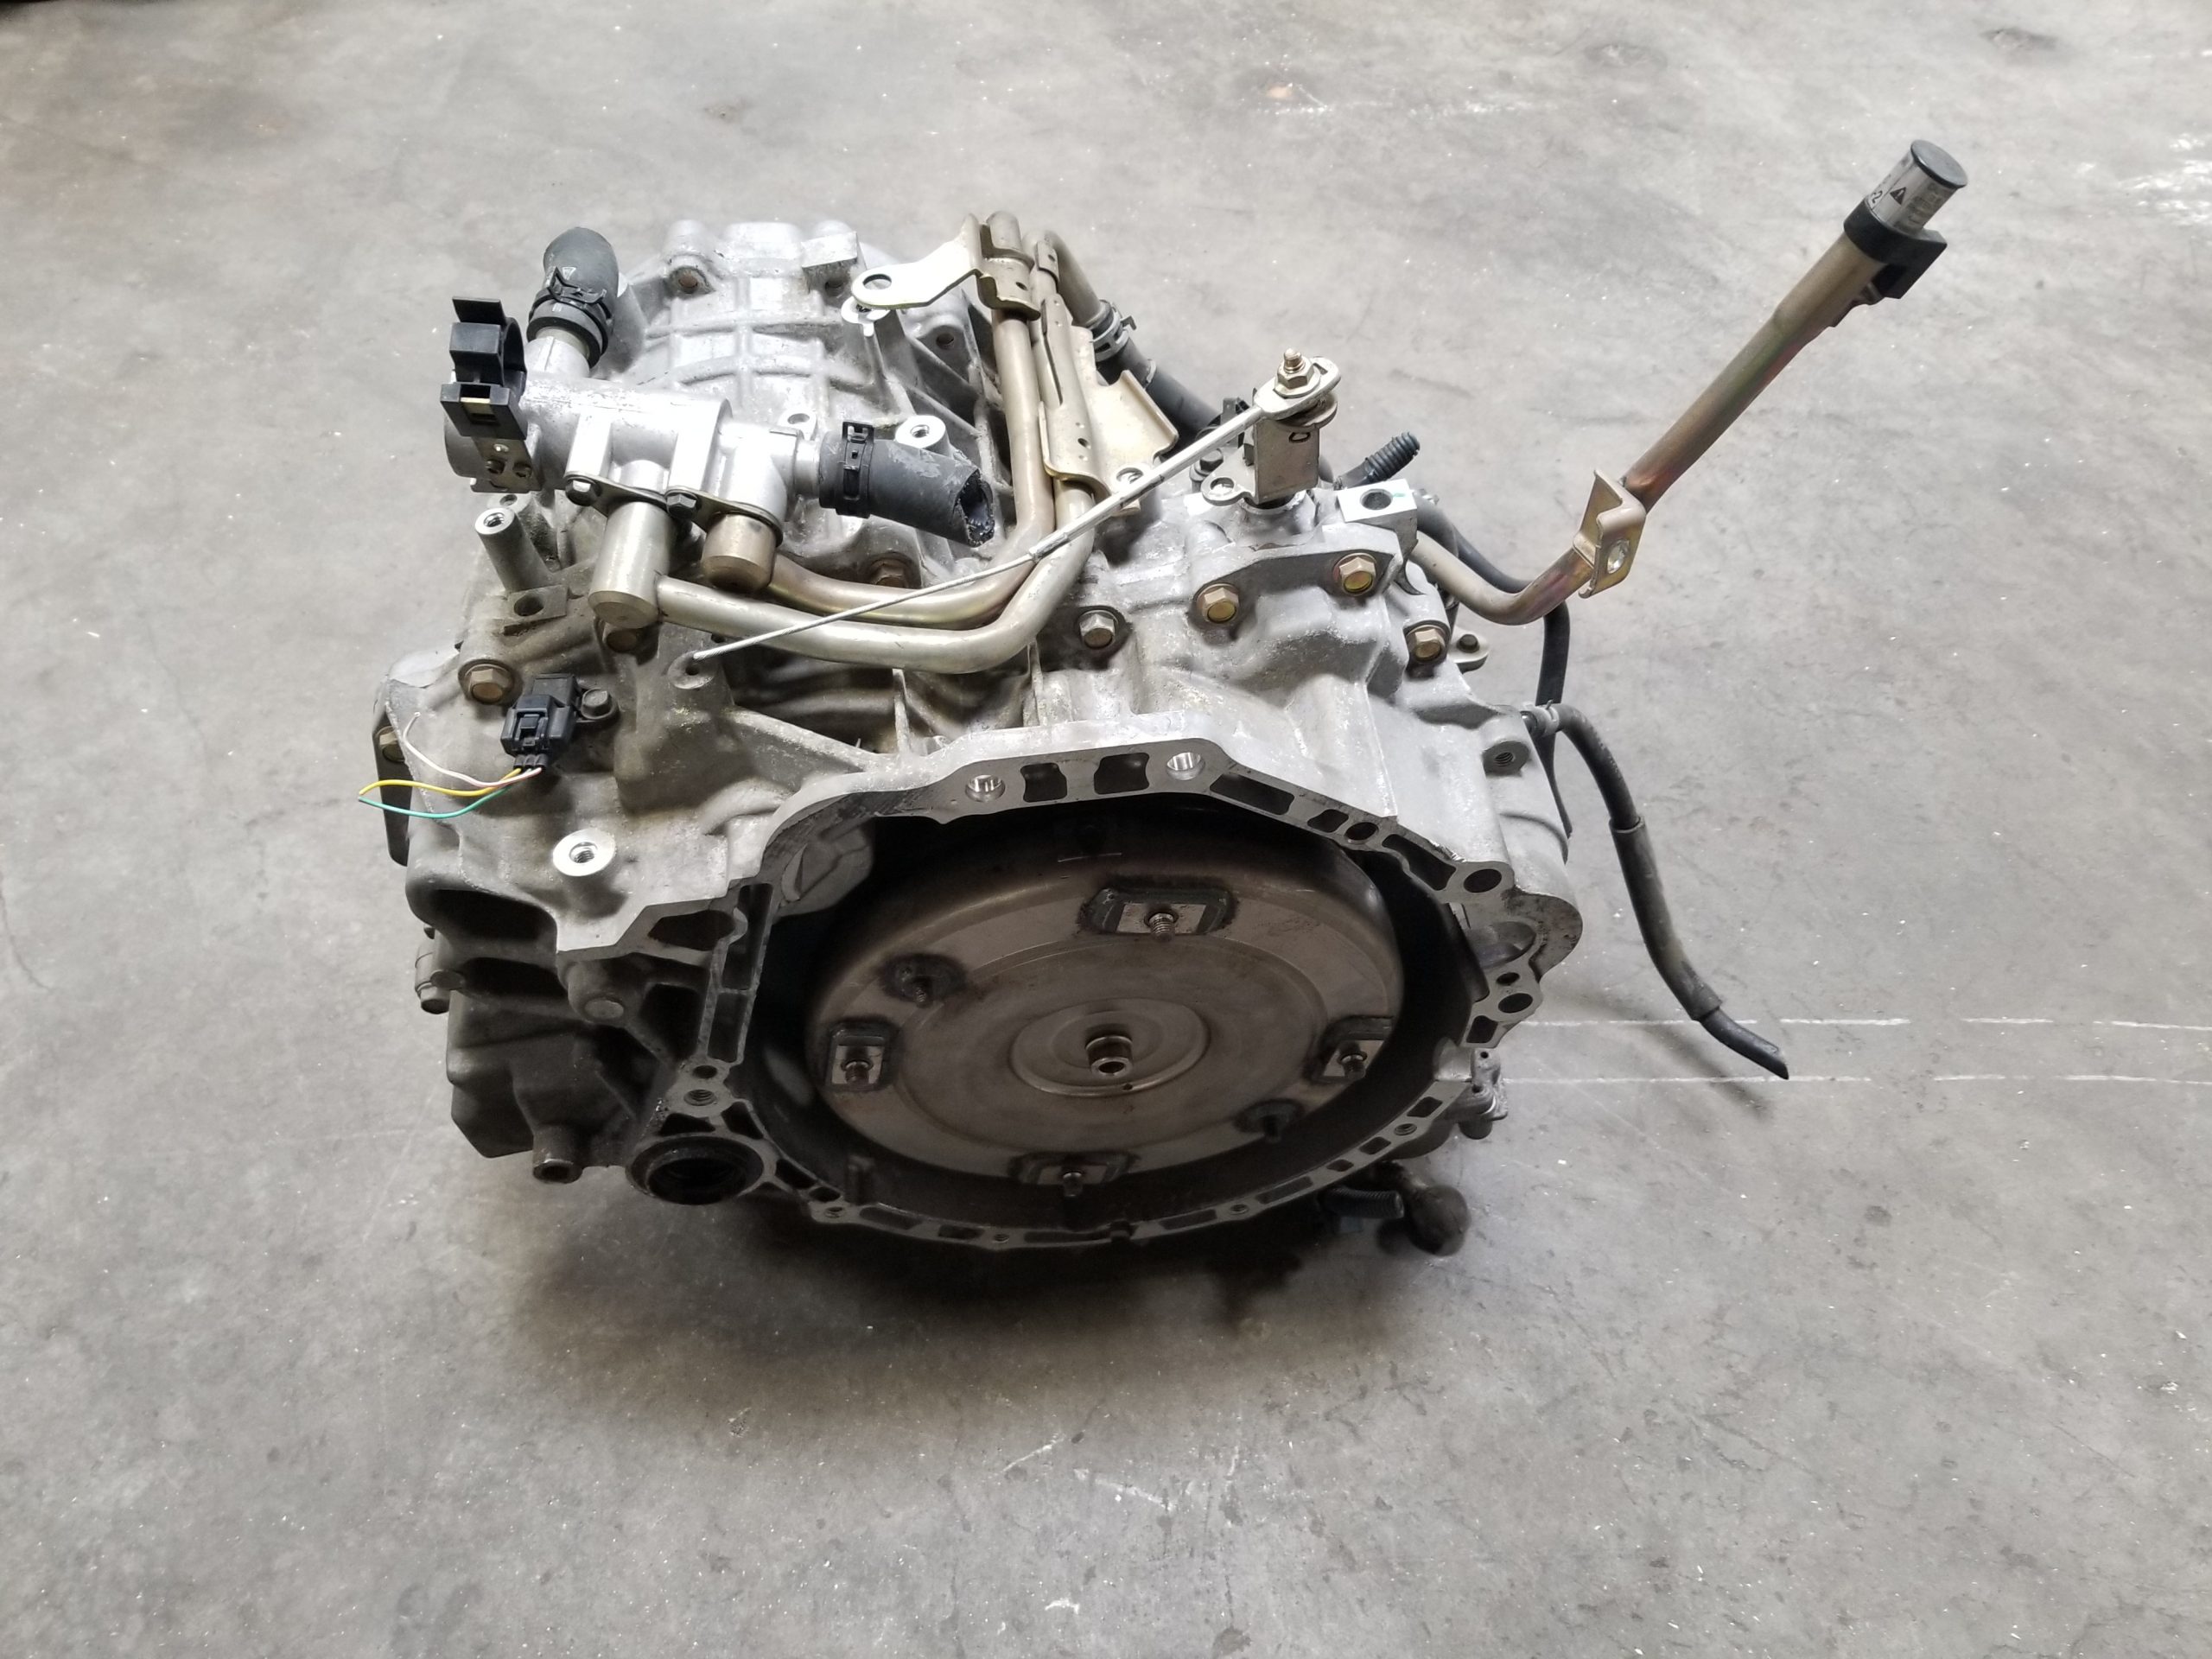 2005 nissan altima transmission replacement cost